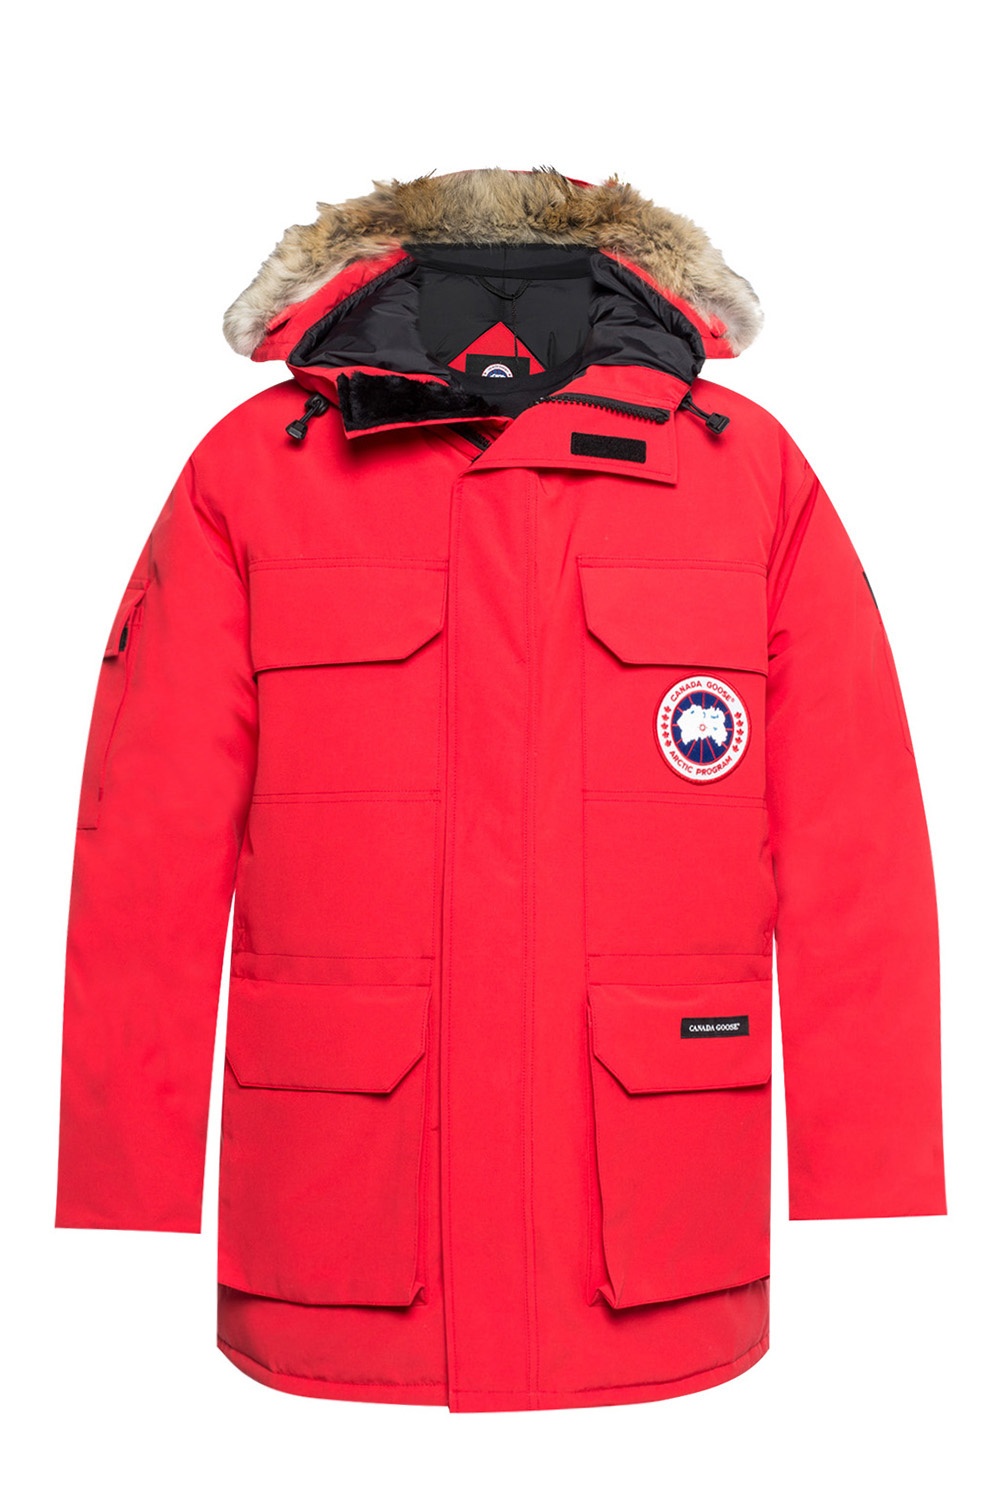 Canada Goose Emerson Mens Soft Shell Ribbed Jacket With Hood